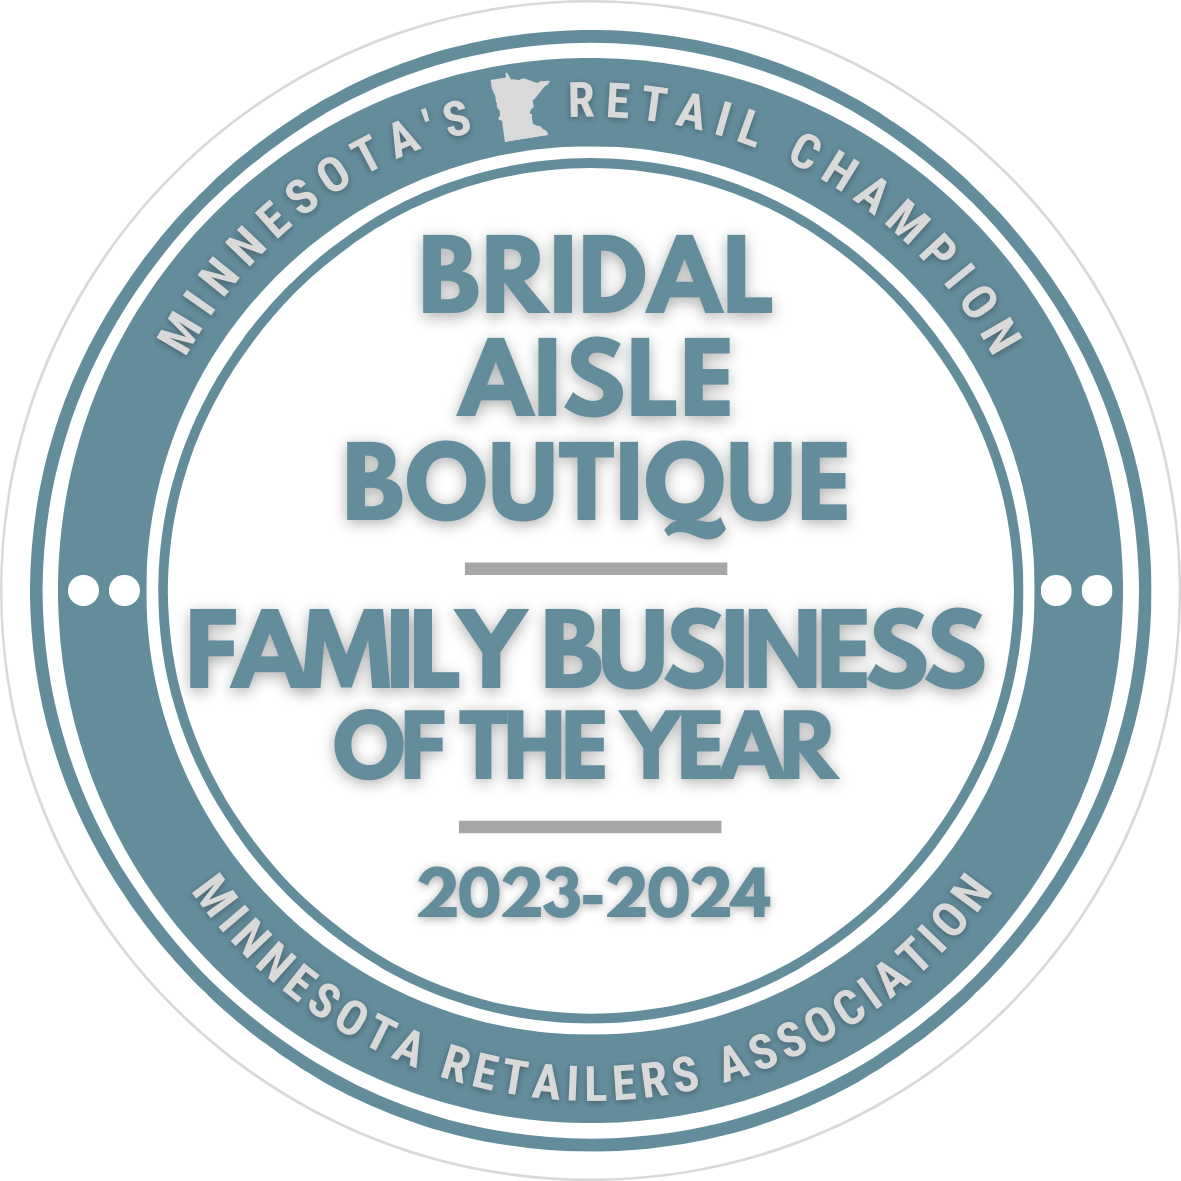 Bridal Aisle Boutique Family Business Of The Year